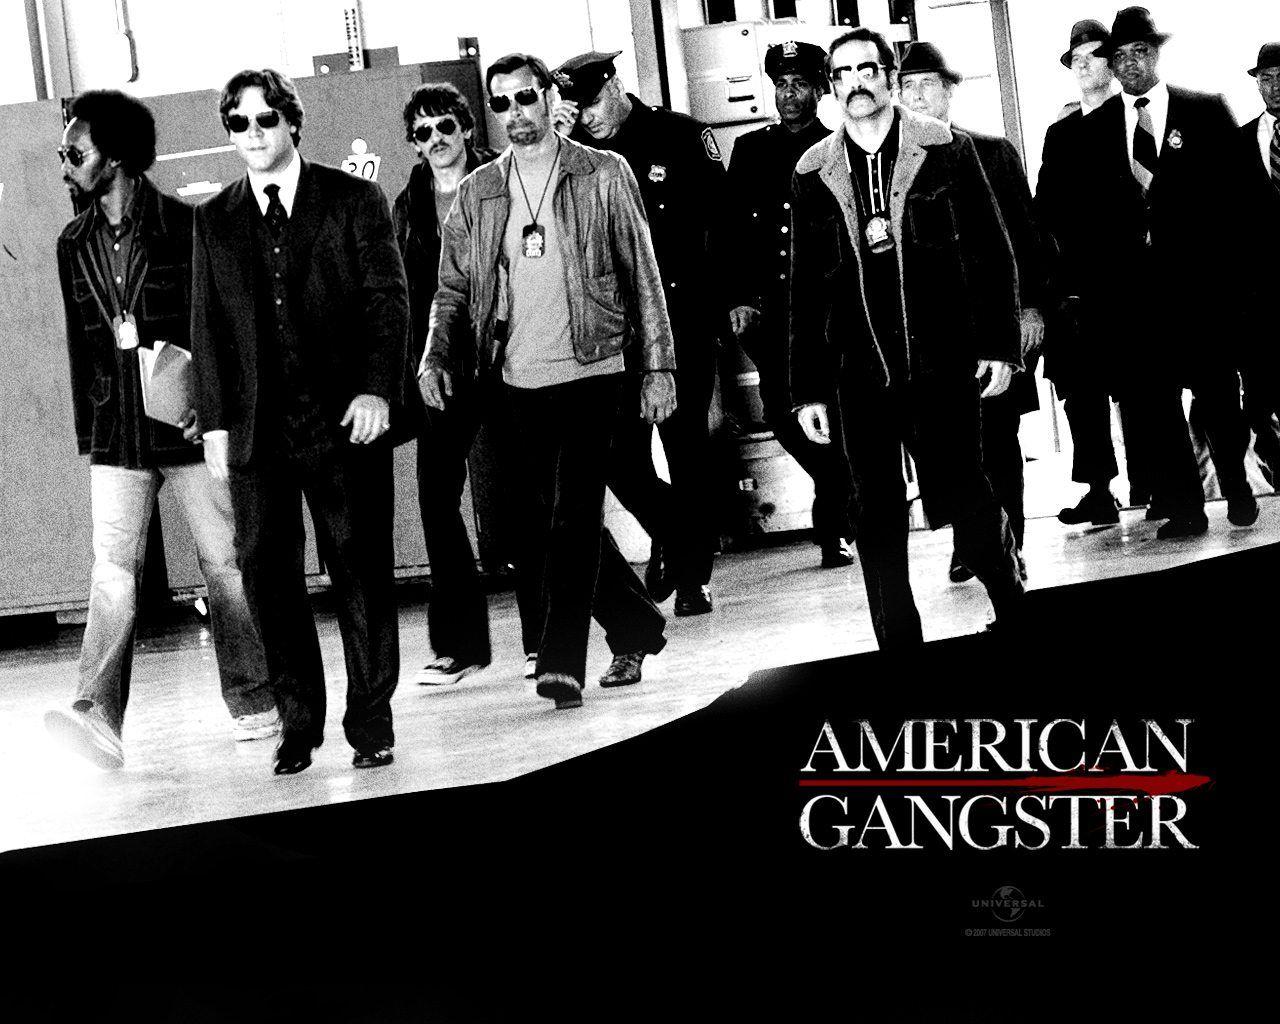 American Gangster Wallpaper for PC. Full HD Picture